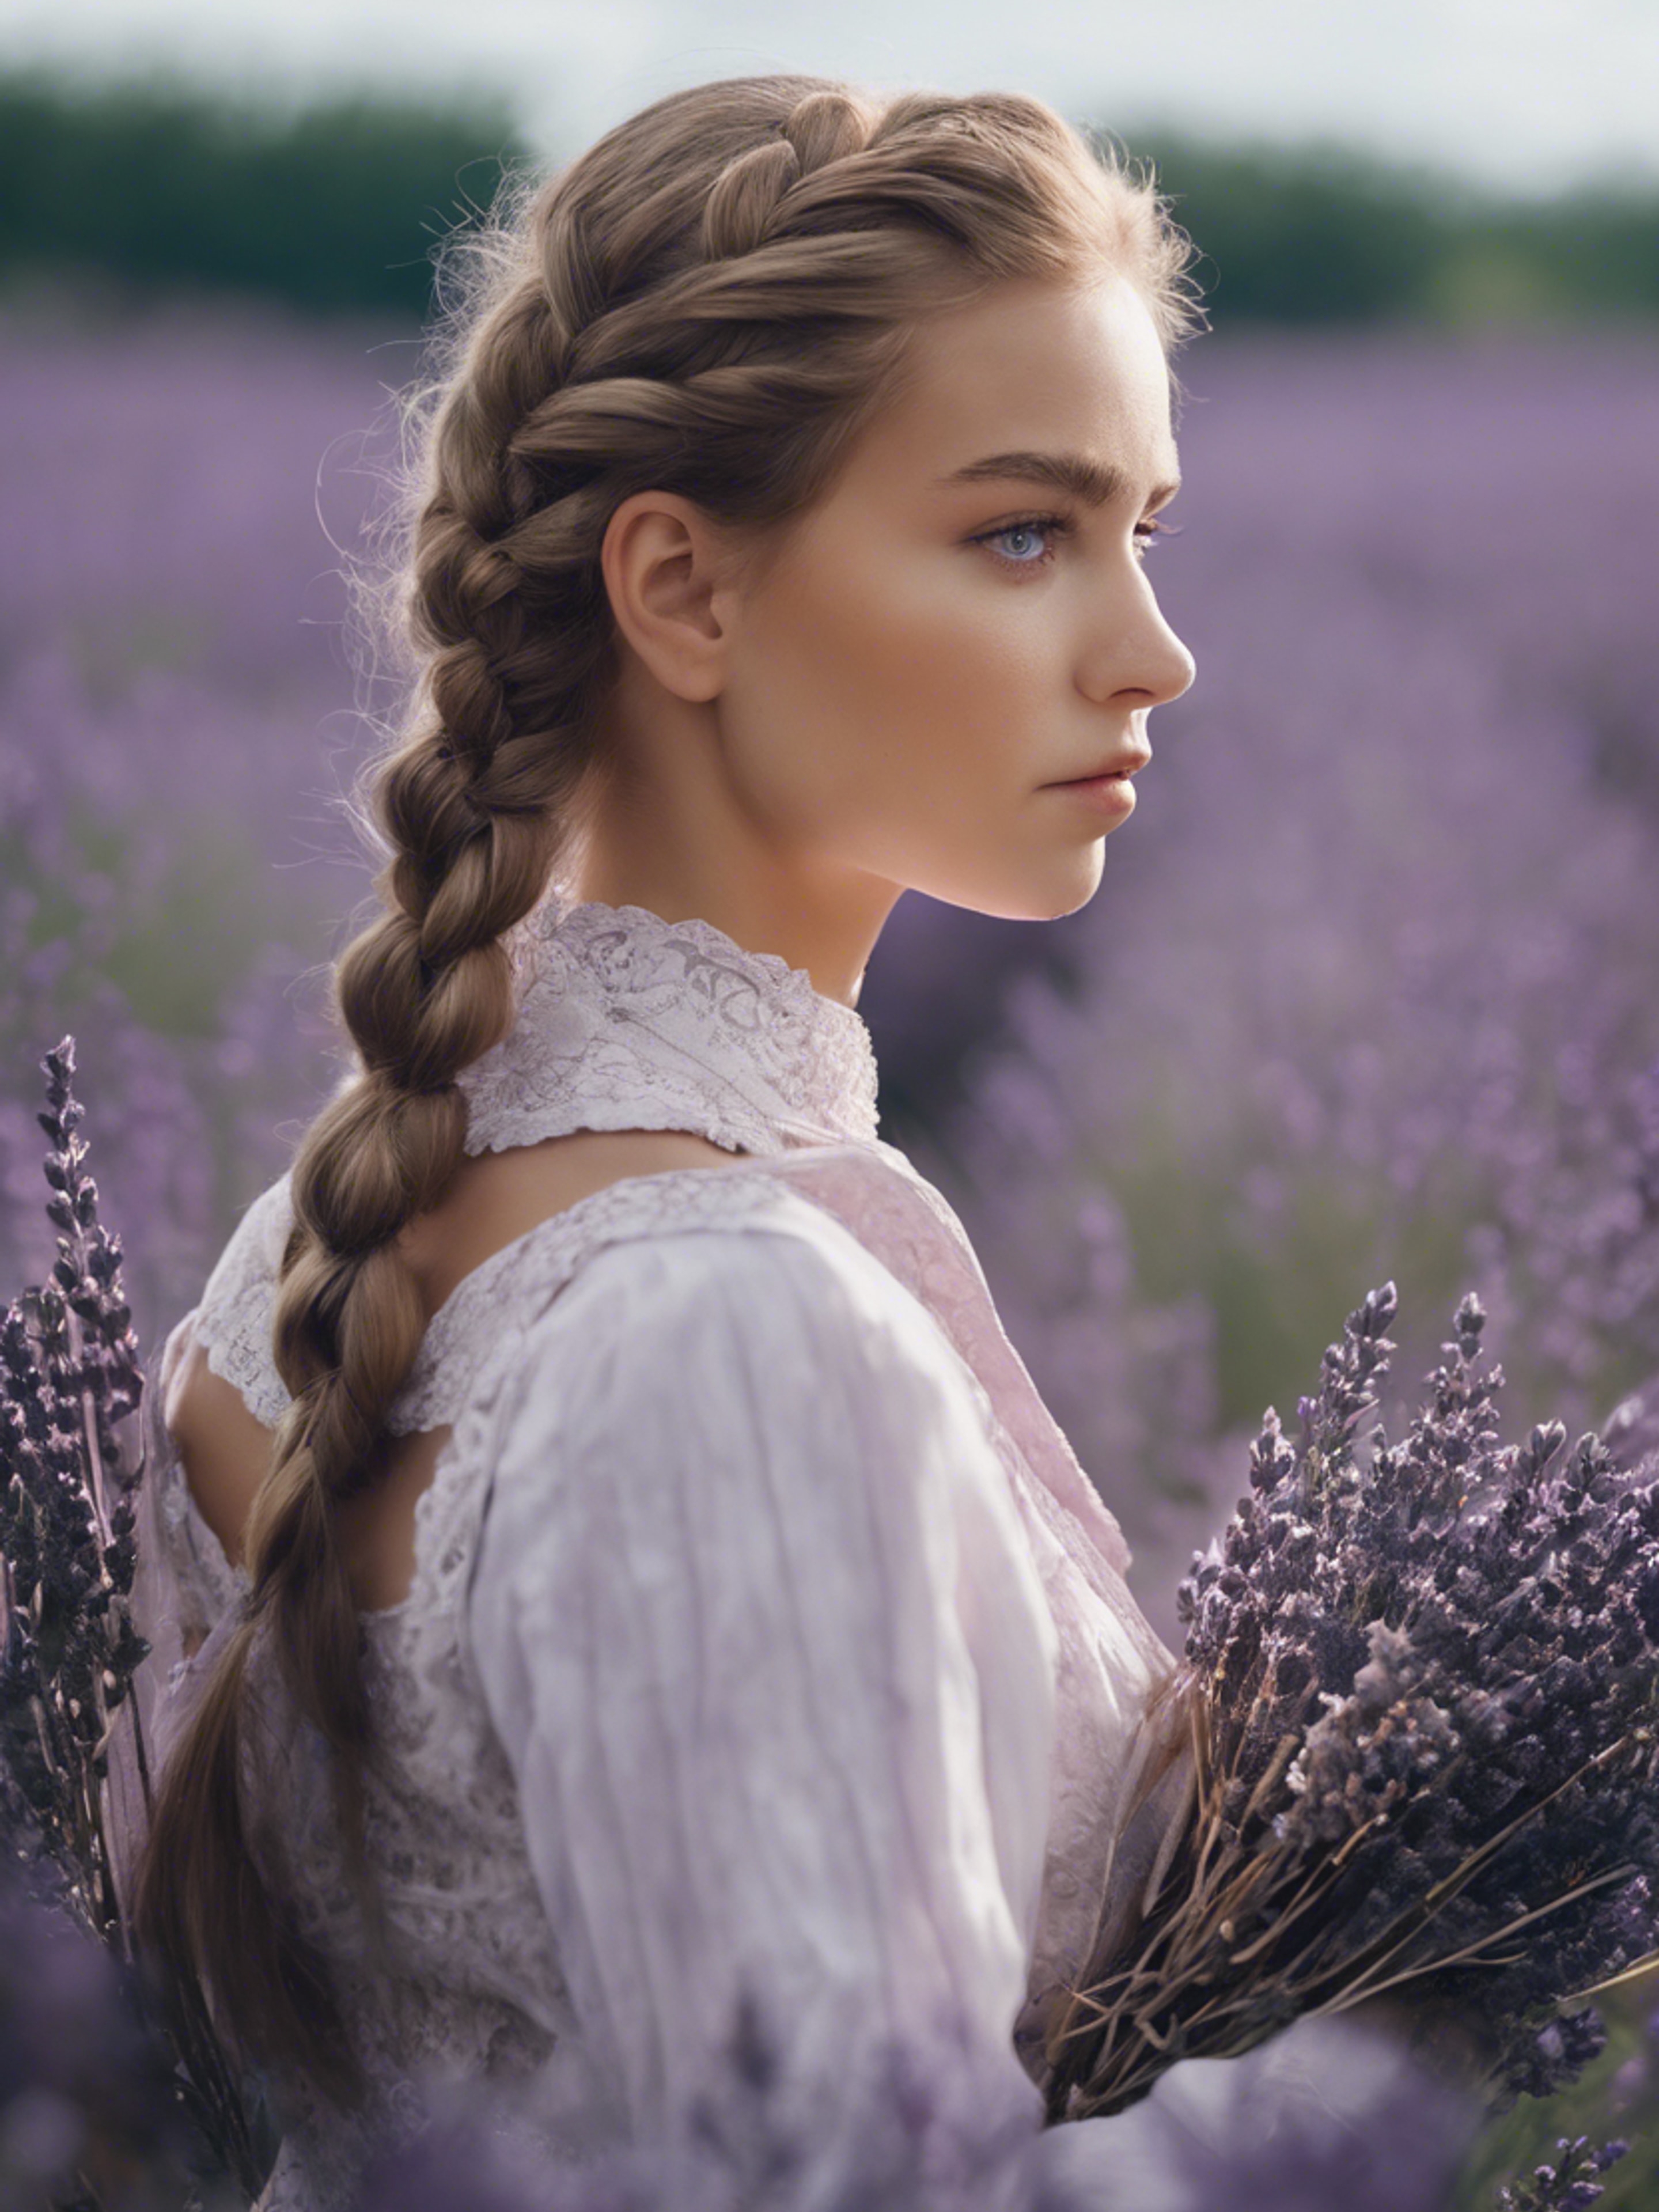 A pretty, light-eyed girl with her hair done in classic French braid, surrounded by a field of French lavender. Валлпапер[c71d23e36c7041a09435]